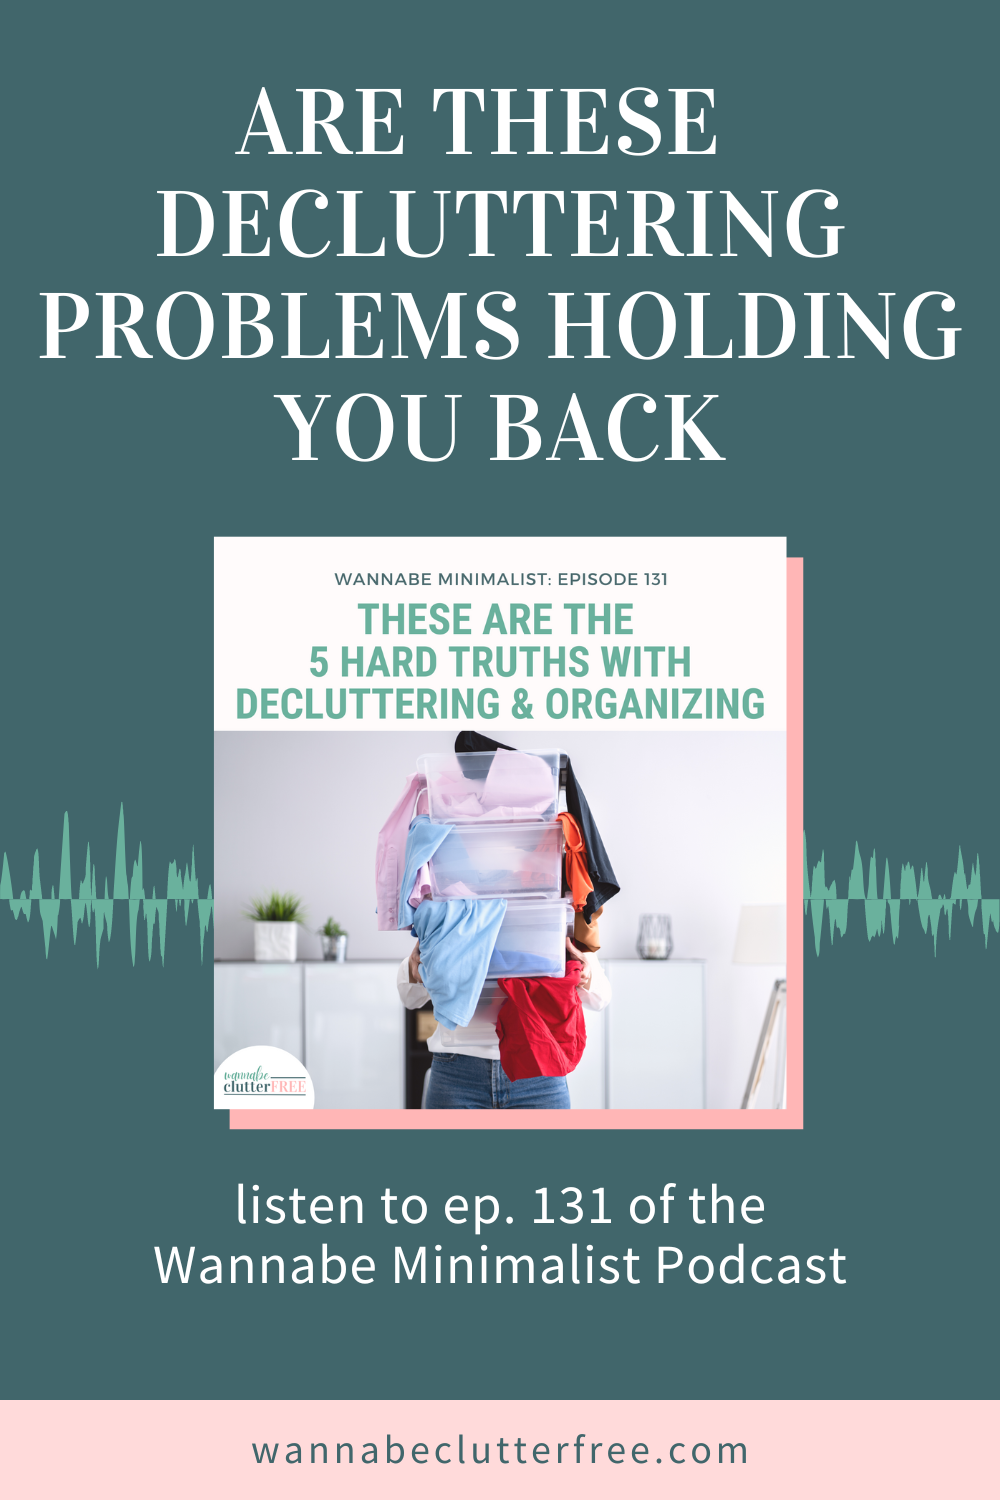 Are These Decluttering Problems Holding You Back?